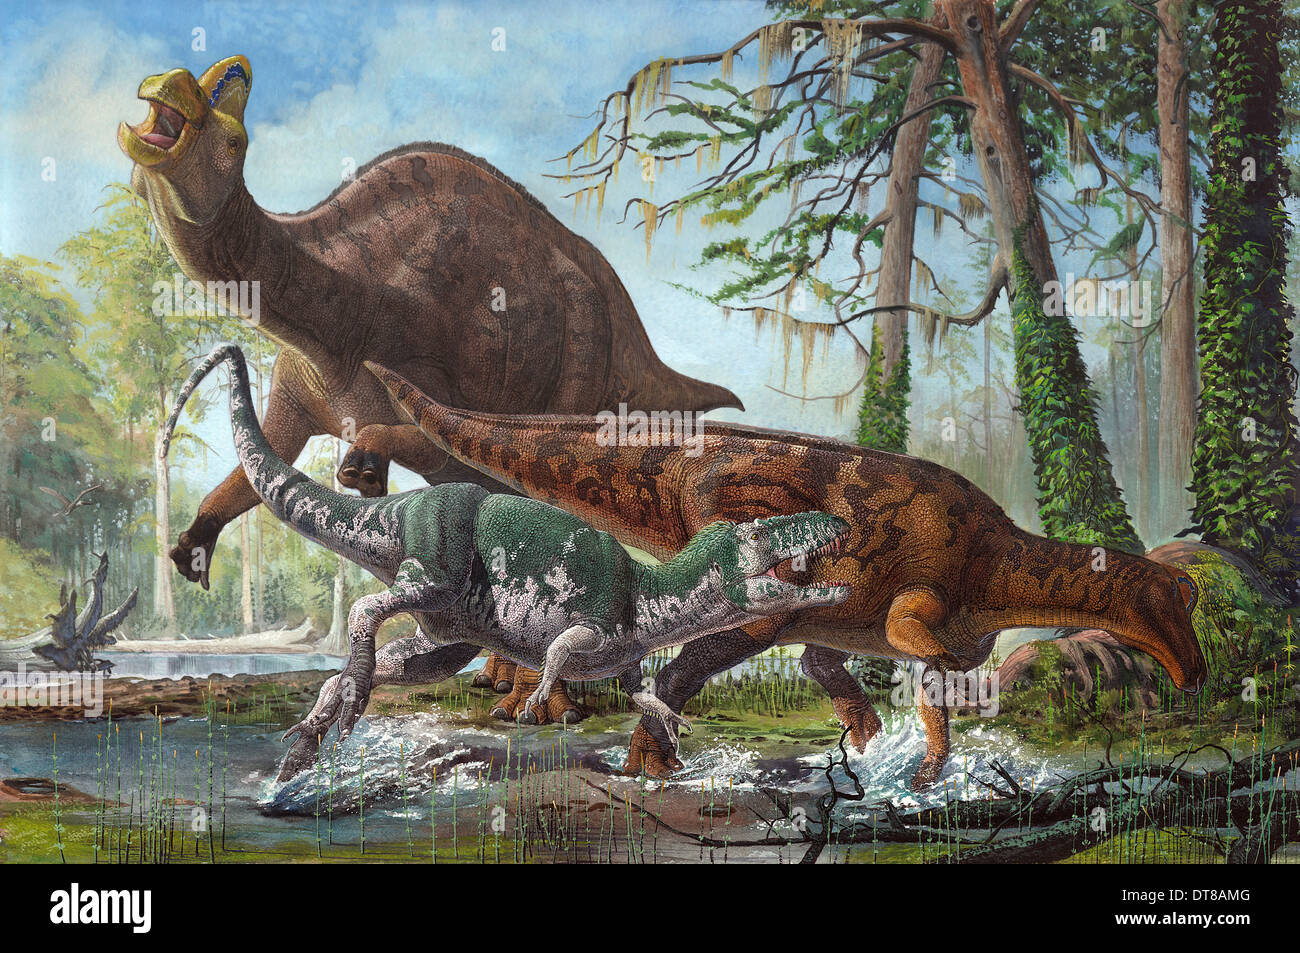 Labocania attacking a Magnapaulia. The tyrannosaurid stumbled and fell, allowing the lambeosaurine to escape. Stock Photo